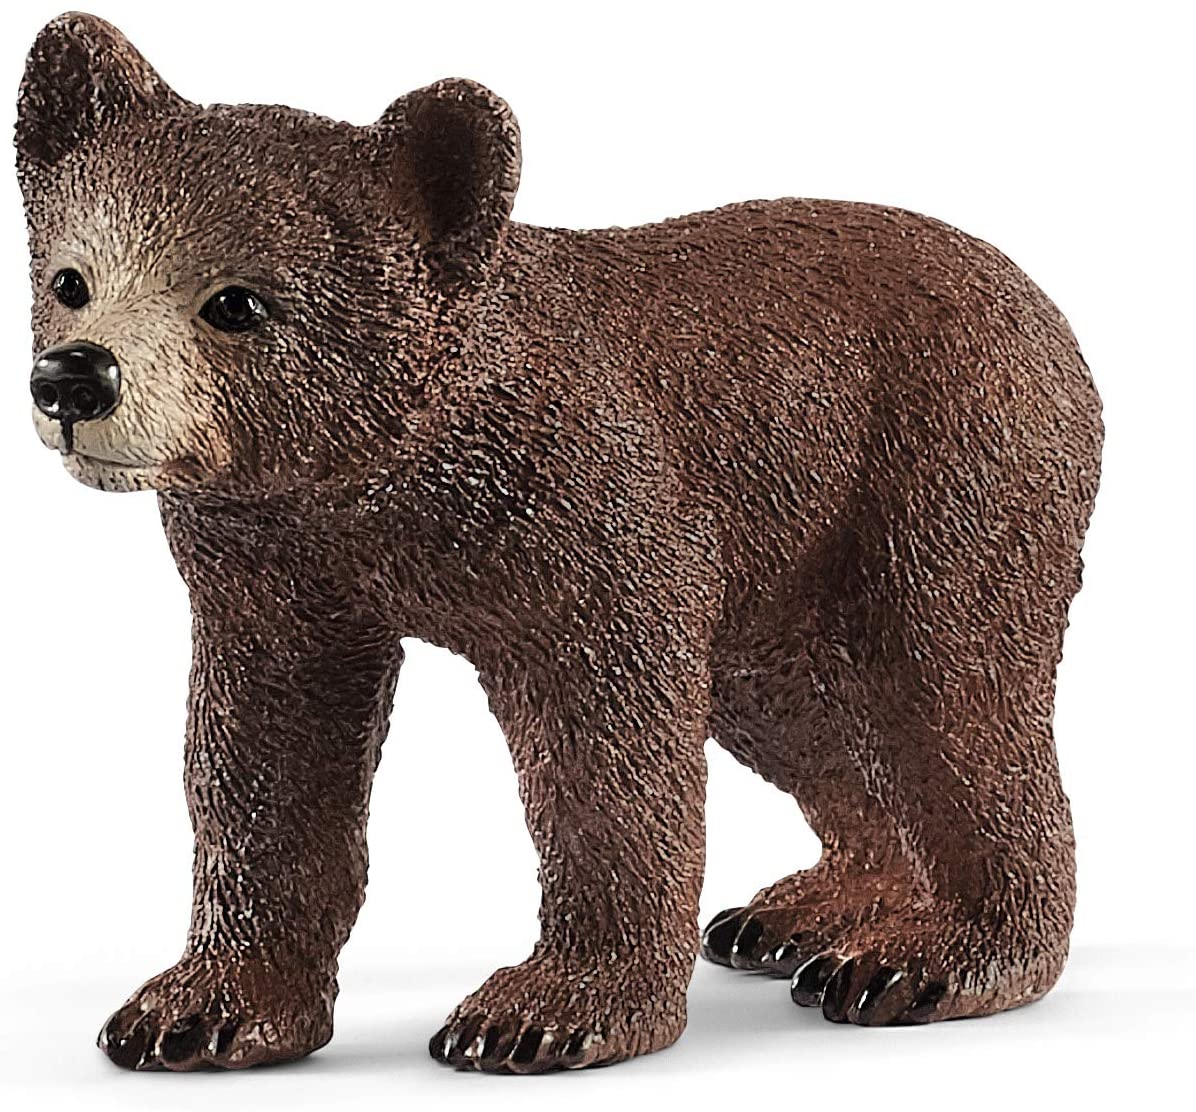 Grizzly Bear Mother and Cub Figure Set